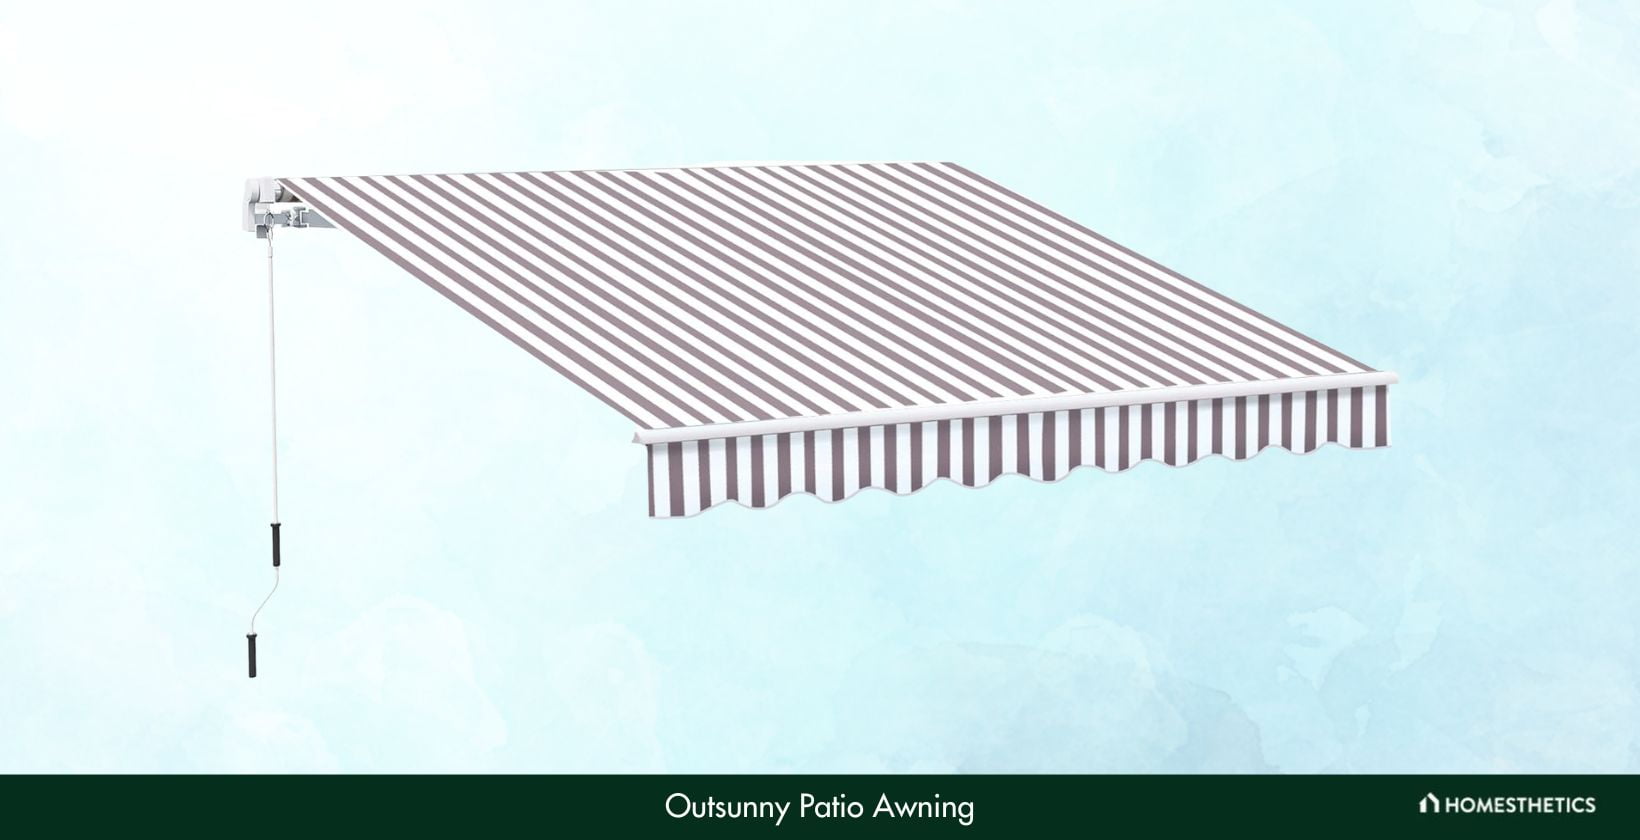 Outsunny Patio Awning107